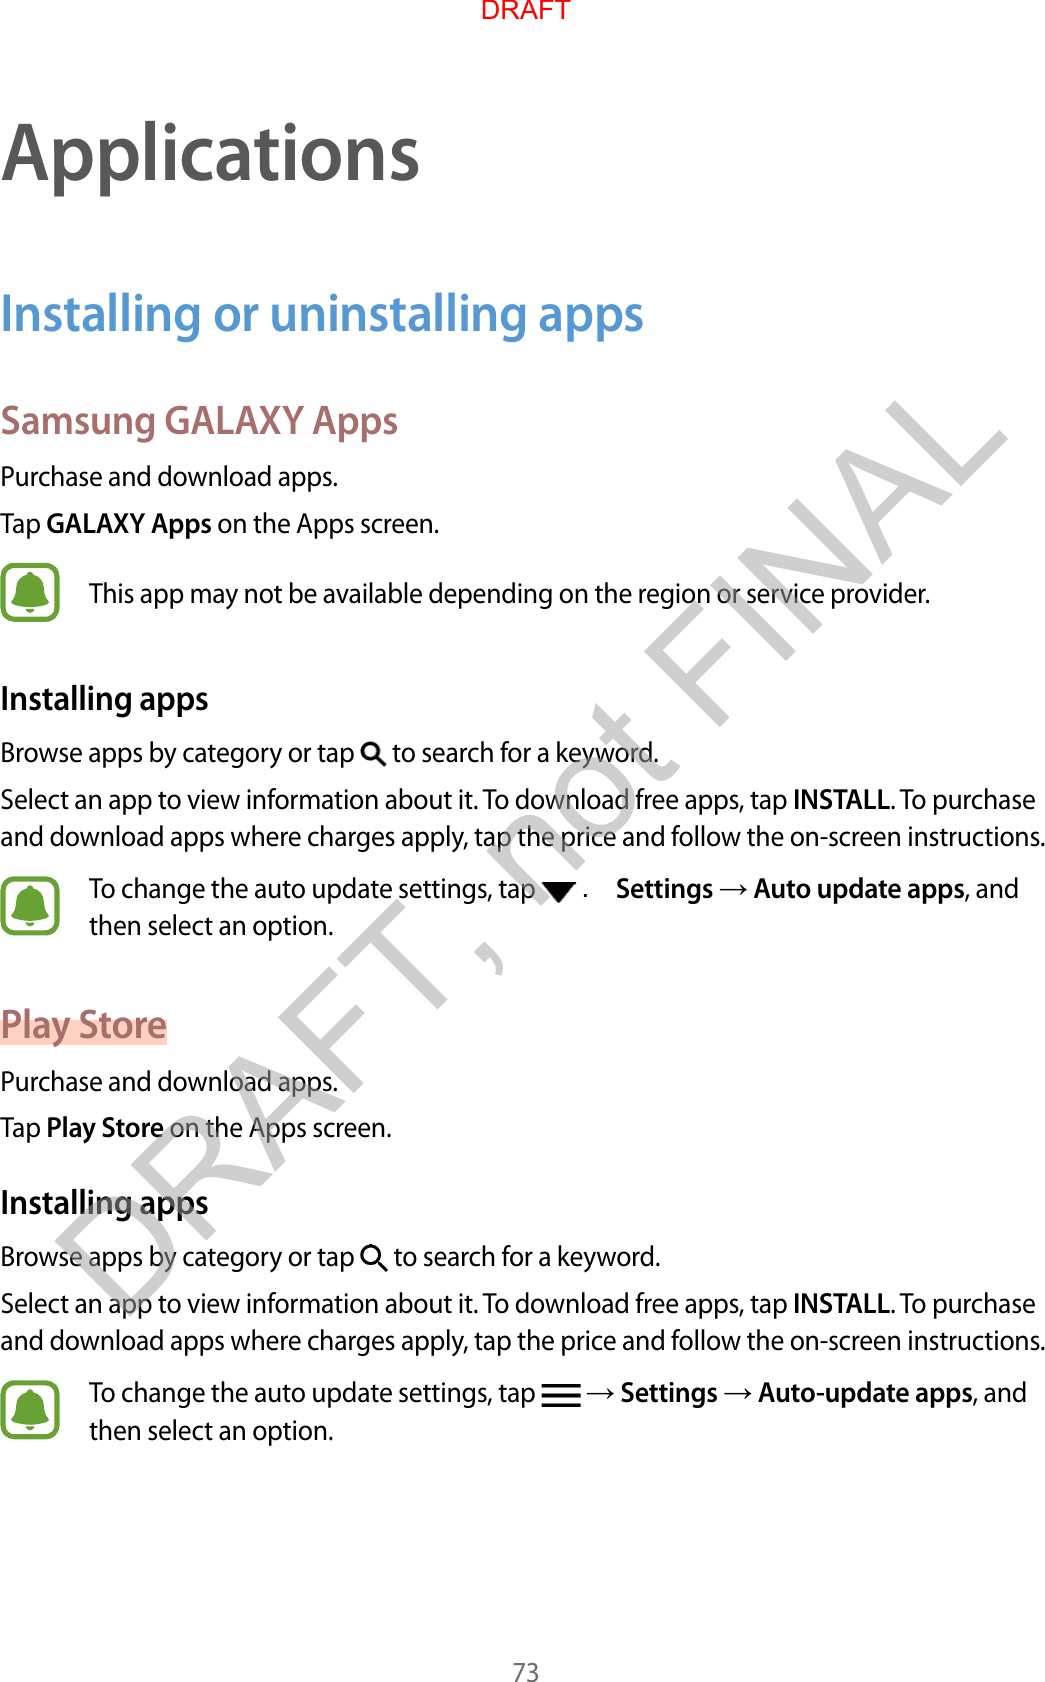 73ApplicationsInstalling or uninstalling appsSamsung GALAXY AppsPur chase and do wnload apps .Tap GALAXY Apps on the Apps screen.This app may not be a vailable depending on the r eg ion or service provider.Installing appsBrow se apps b y cat egory or tap   to search for a keywor d .Select an app to view inf ormation about it. To download free apps, tap INSTALL. To purchase and download apps where char ges apply, tap the price and f ollo w the on-scr een instructions.To change the auto update settings , tap   . Settings  Aut o updat e apps, and then select an option.Pla y St orePur chase and do wnload apps .Tap Play St or e on the Apps screen.Installing appsBrow se apps b y cat egory or tap   to search for a keywor d .Select an app to view inf ormation about it. To download free apps, tap INSTALL. To purchase and download apps where char ges apply, tap the price and f ollo w the on-scr een instructions.To change the auto update settings , tap    Settings  Aut o-update apps, and then select an option.DRAFTDRAFT, not FINAL